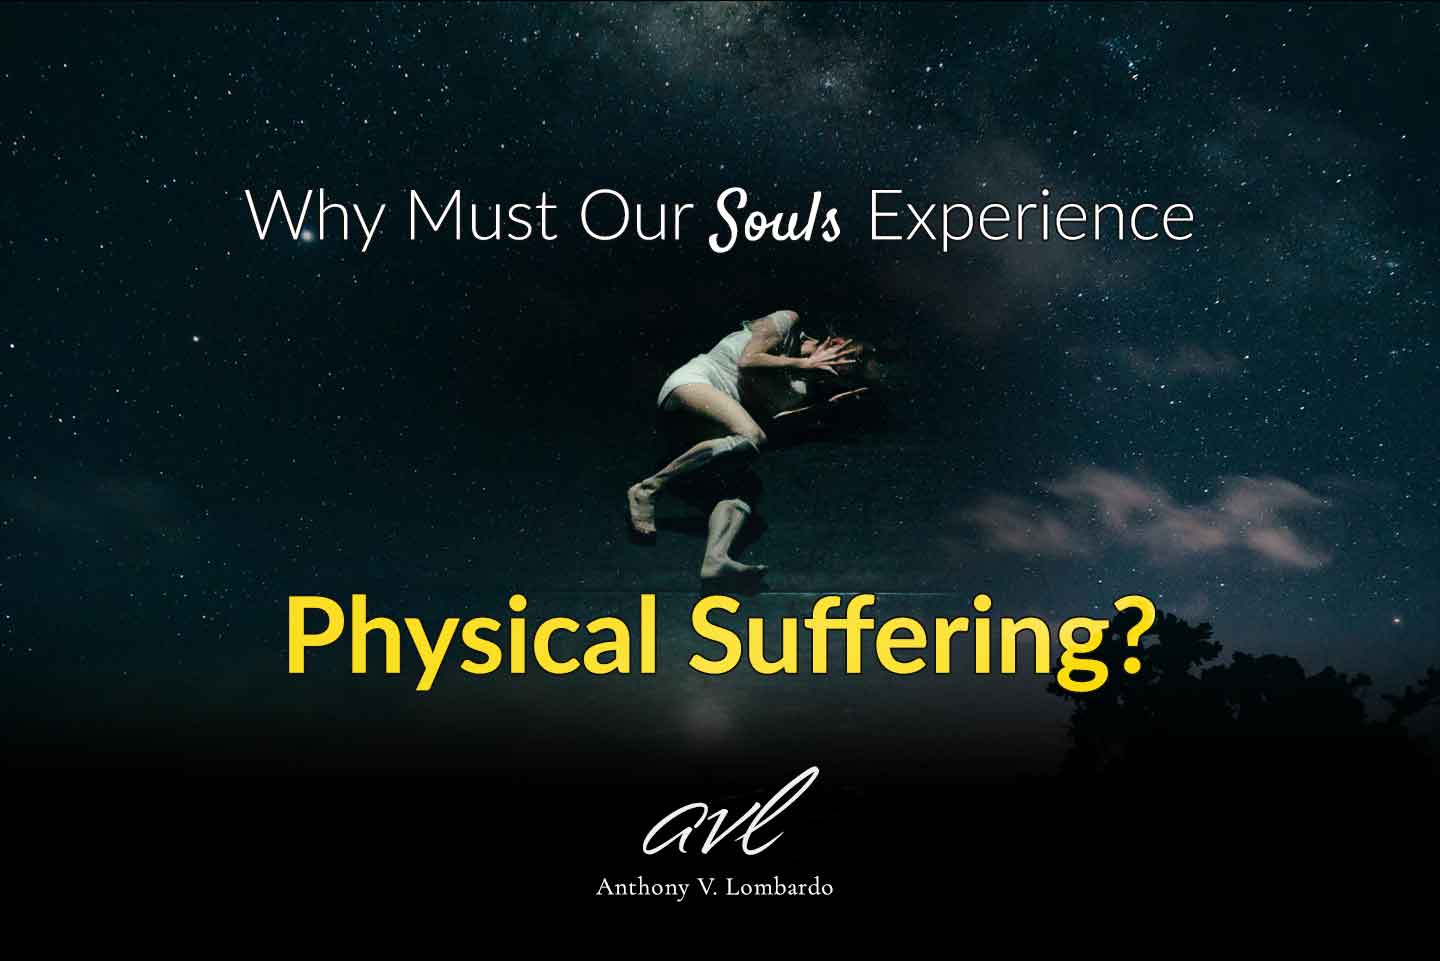 Why Must Our Souls Experience Physical Suffering?